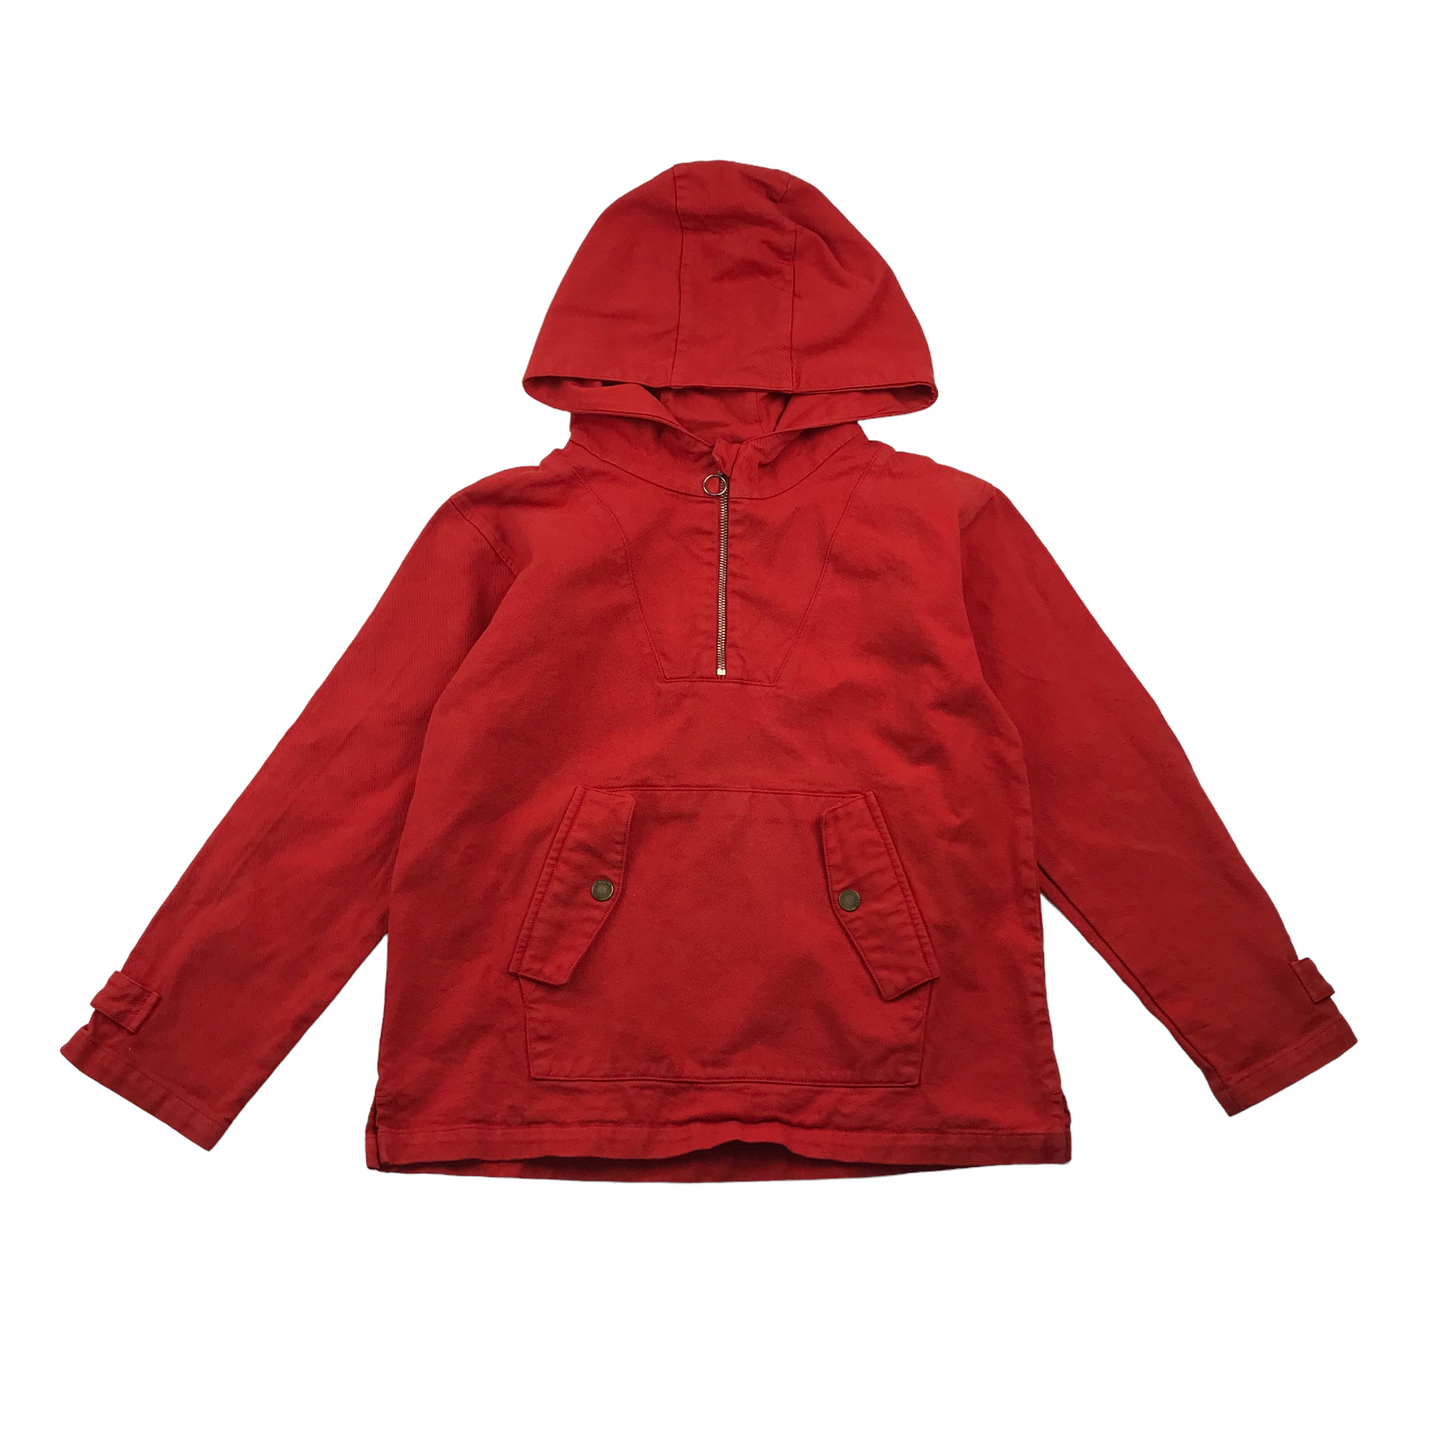 Pecegueiro Red Pullover Light Jacket Age 12